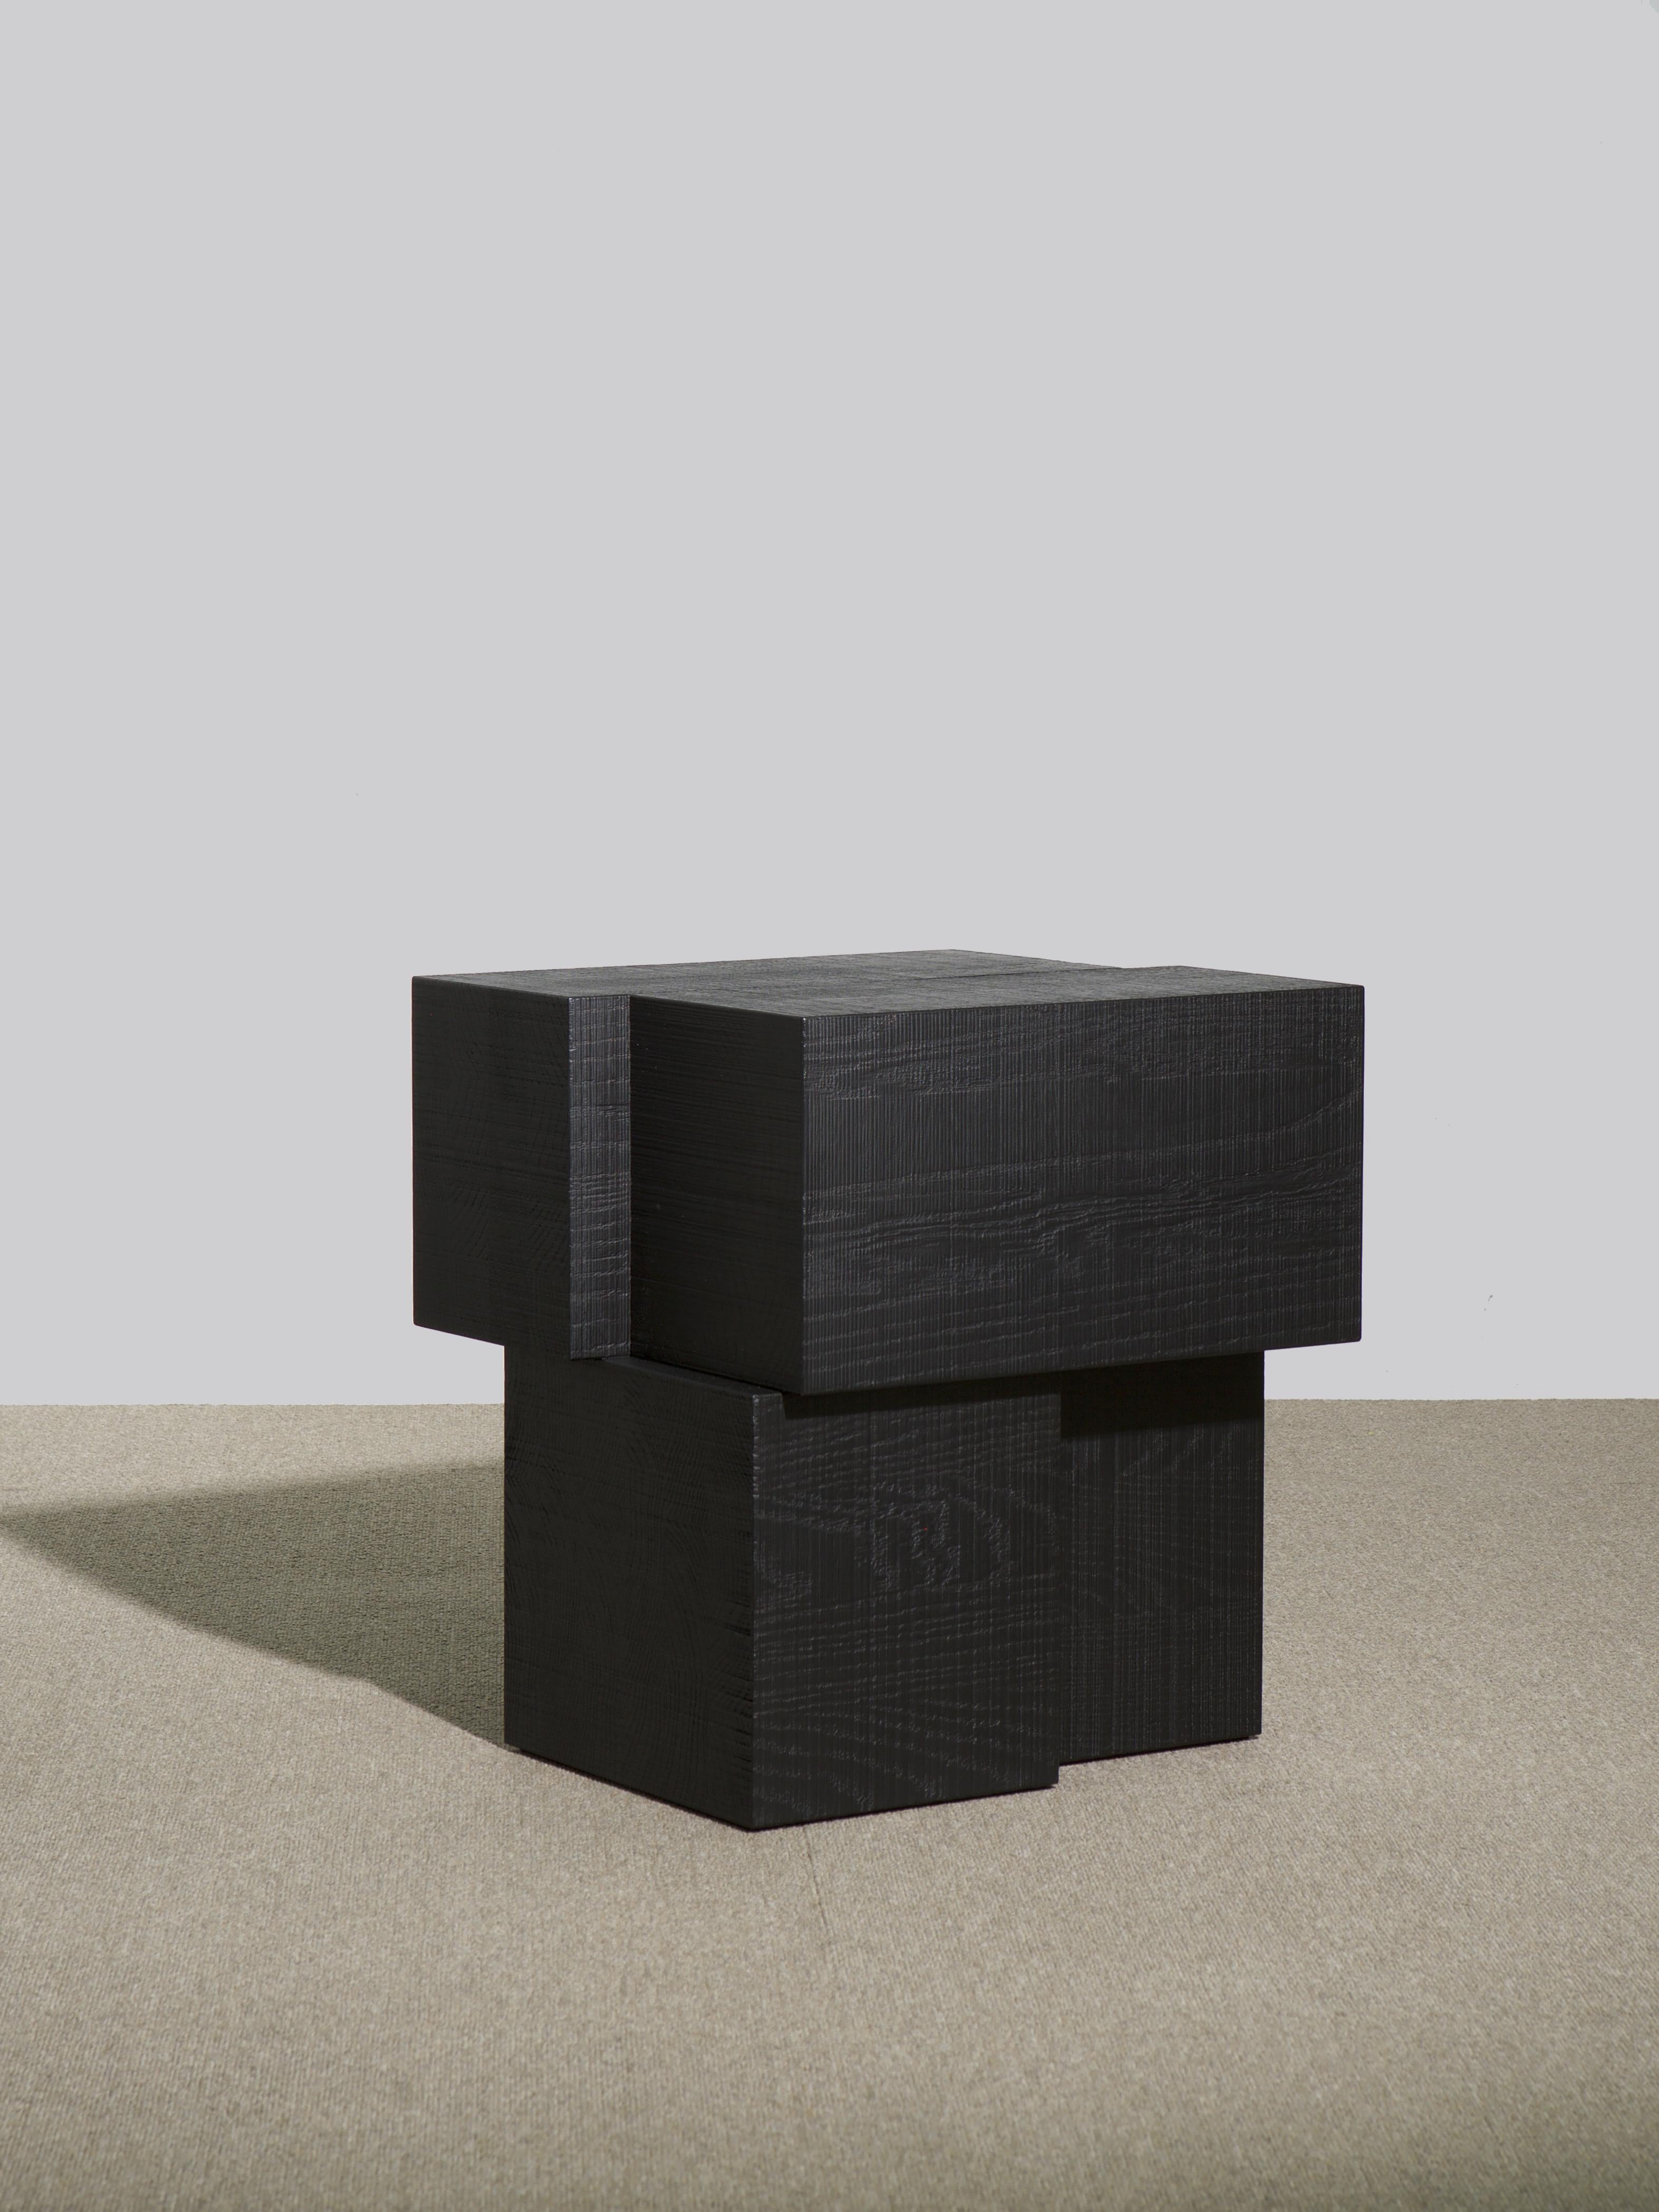 Black layered oak wood stool by Hyungshin Hwang.
Dimensions: D 36 x W 30 x H 45 cm.
Materials: ebonized red oak.

Layered Series is the main theme and concept of work of Hwang, who continues his experiment which is based on architectural